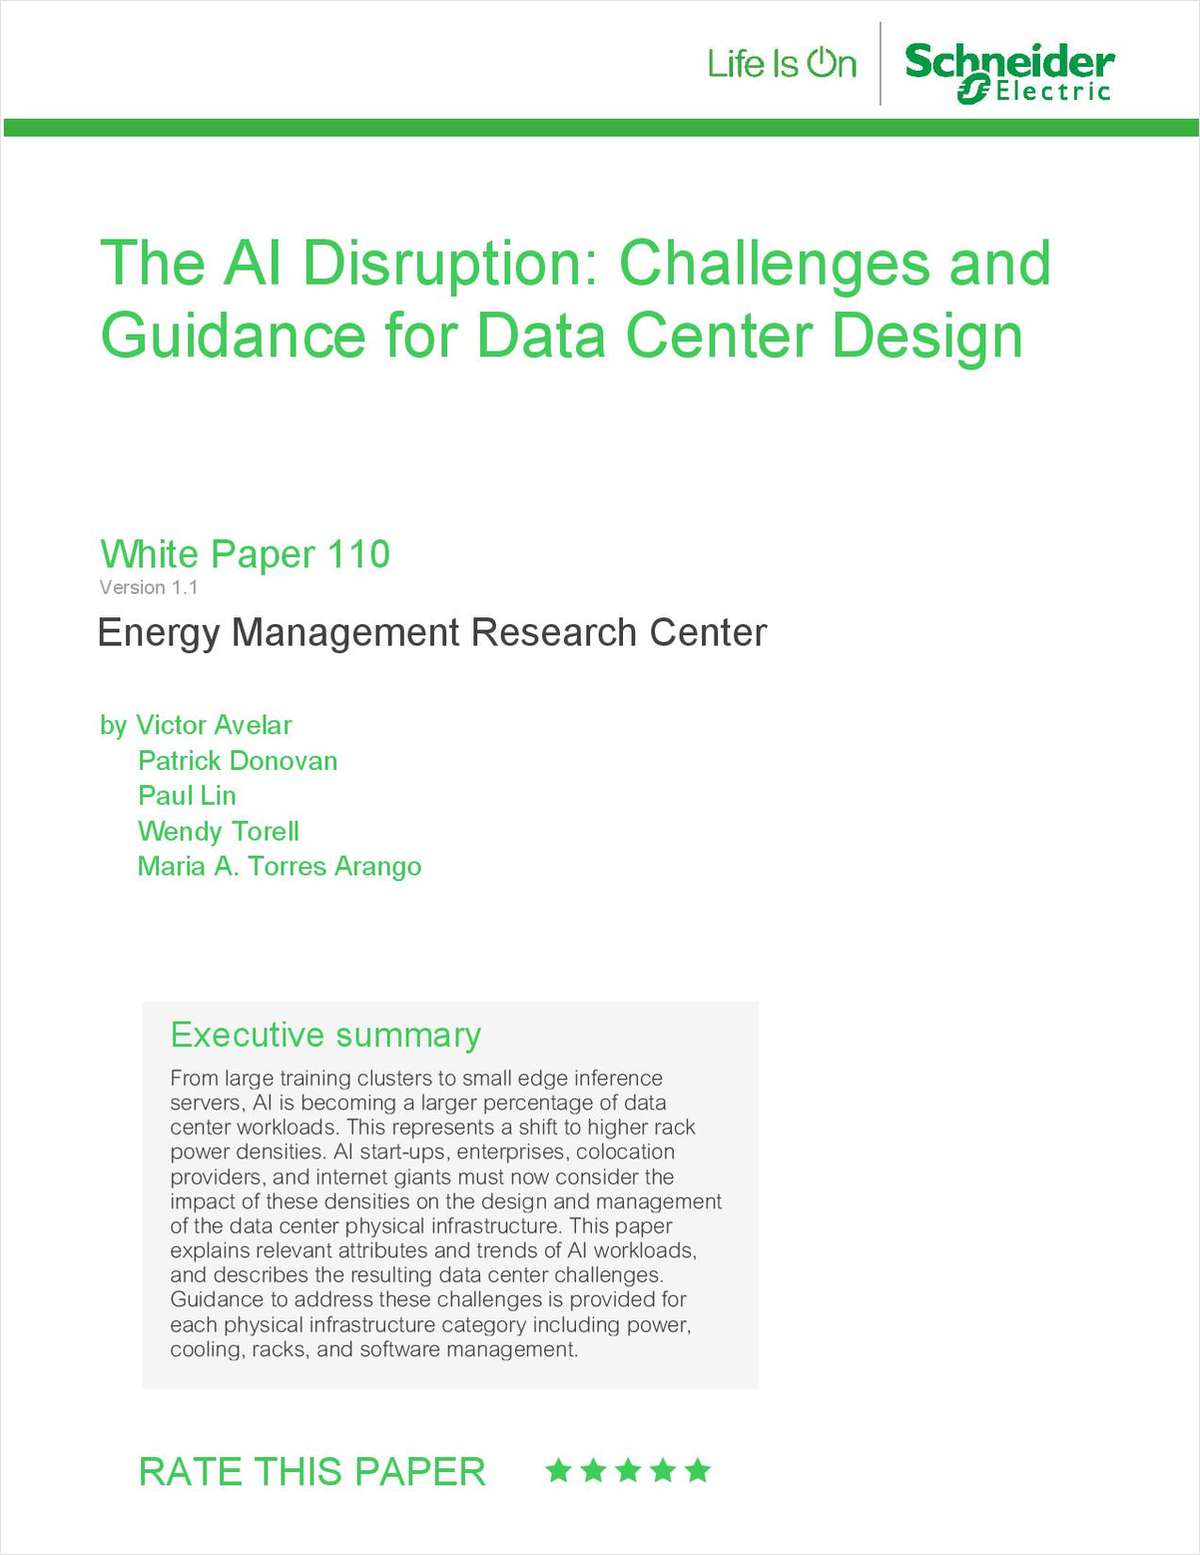 The AI Disruption: Challenges and Guidance for Data Center Design